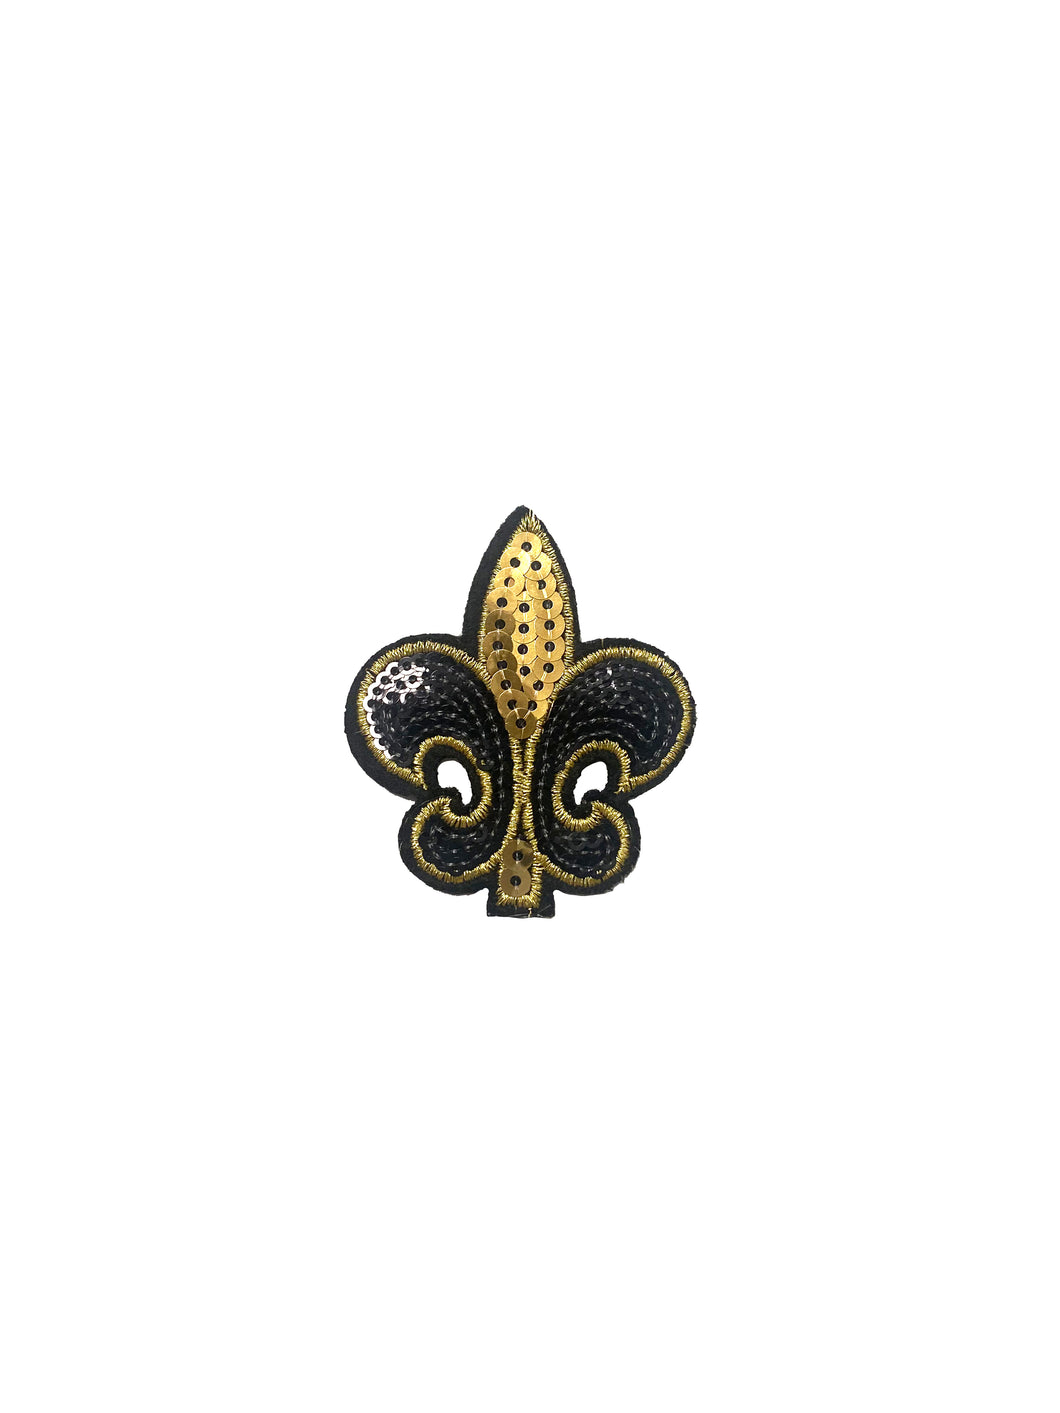 Fleur de Lis Sequin Iron On Patch Black and Gold - Small